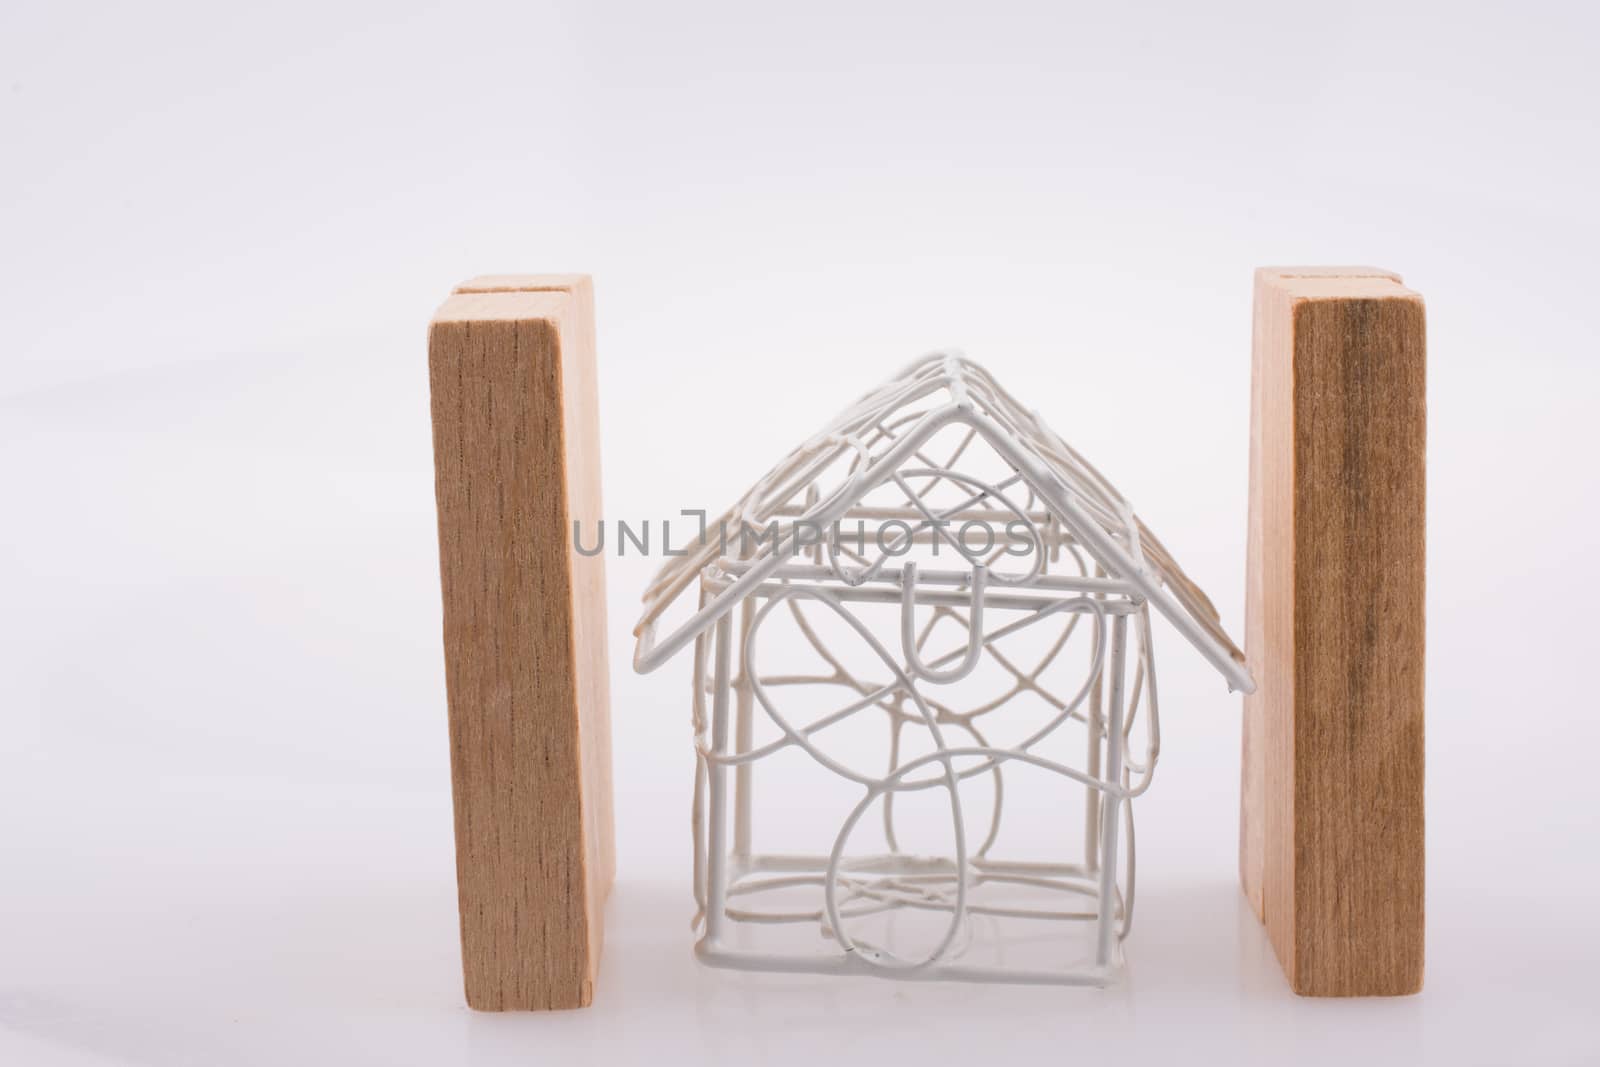 Little wired metal model house  between two domino pieces by berkay